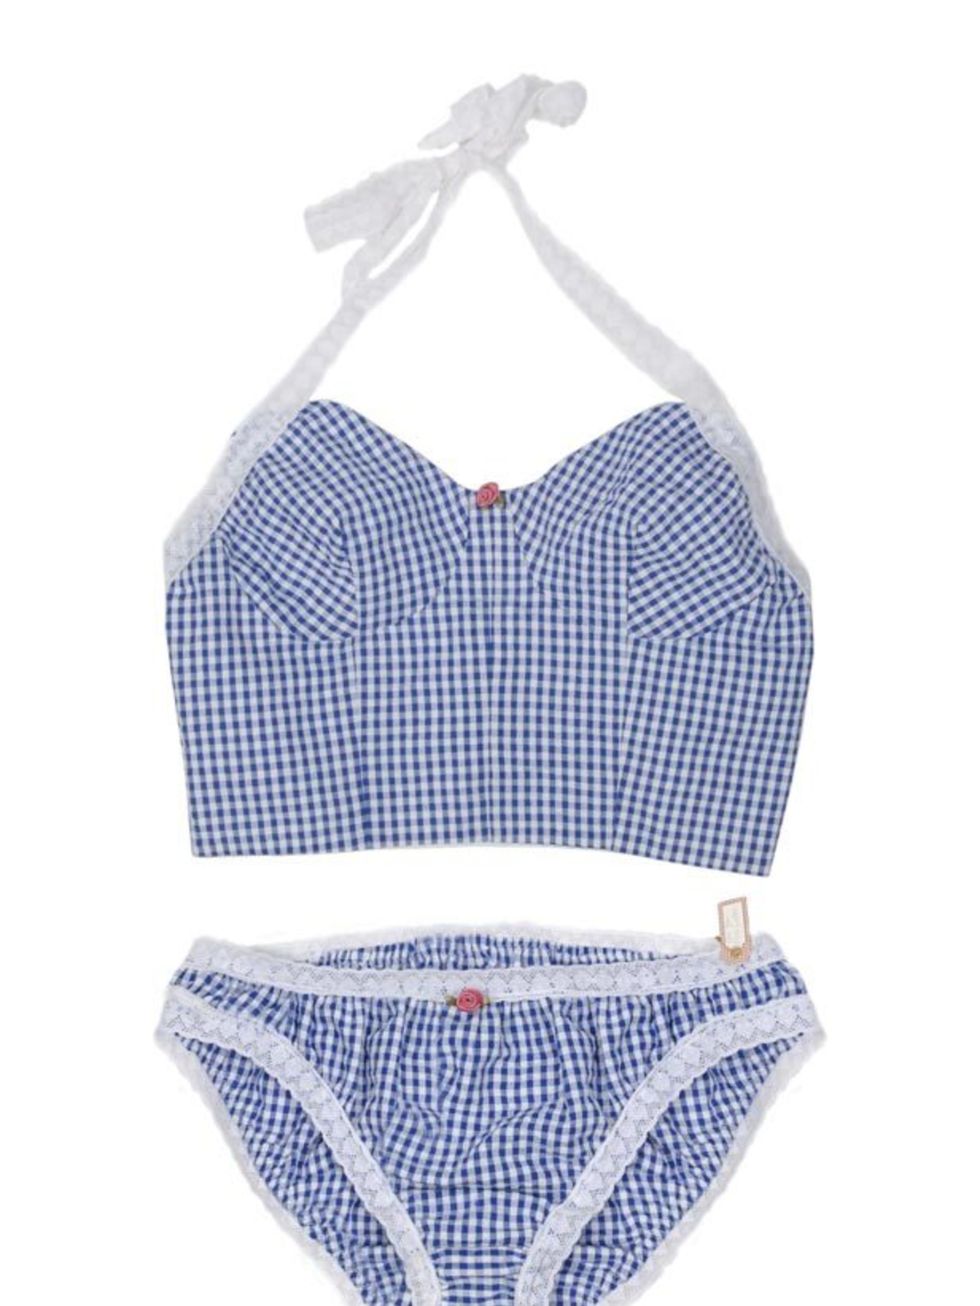 <p>Gingham cami and knicker set, £21, by Miss Crofton at <a href="http://www.pretaportobello.com/shop/underwear/sets/miss-crofton-blue-gingham-cami-and-knicker-set.aspx">Pretaportobello</a> </p>